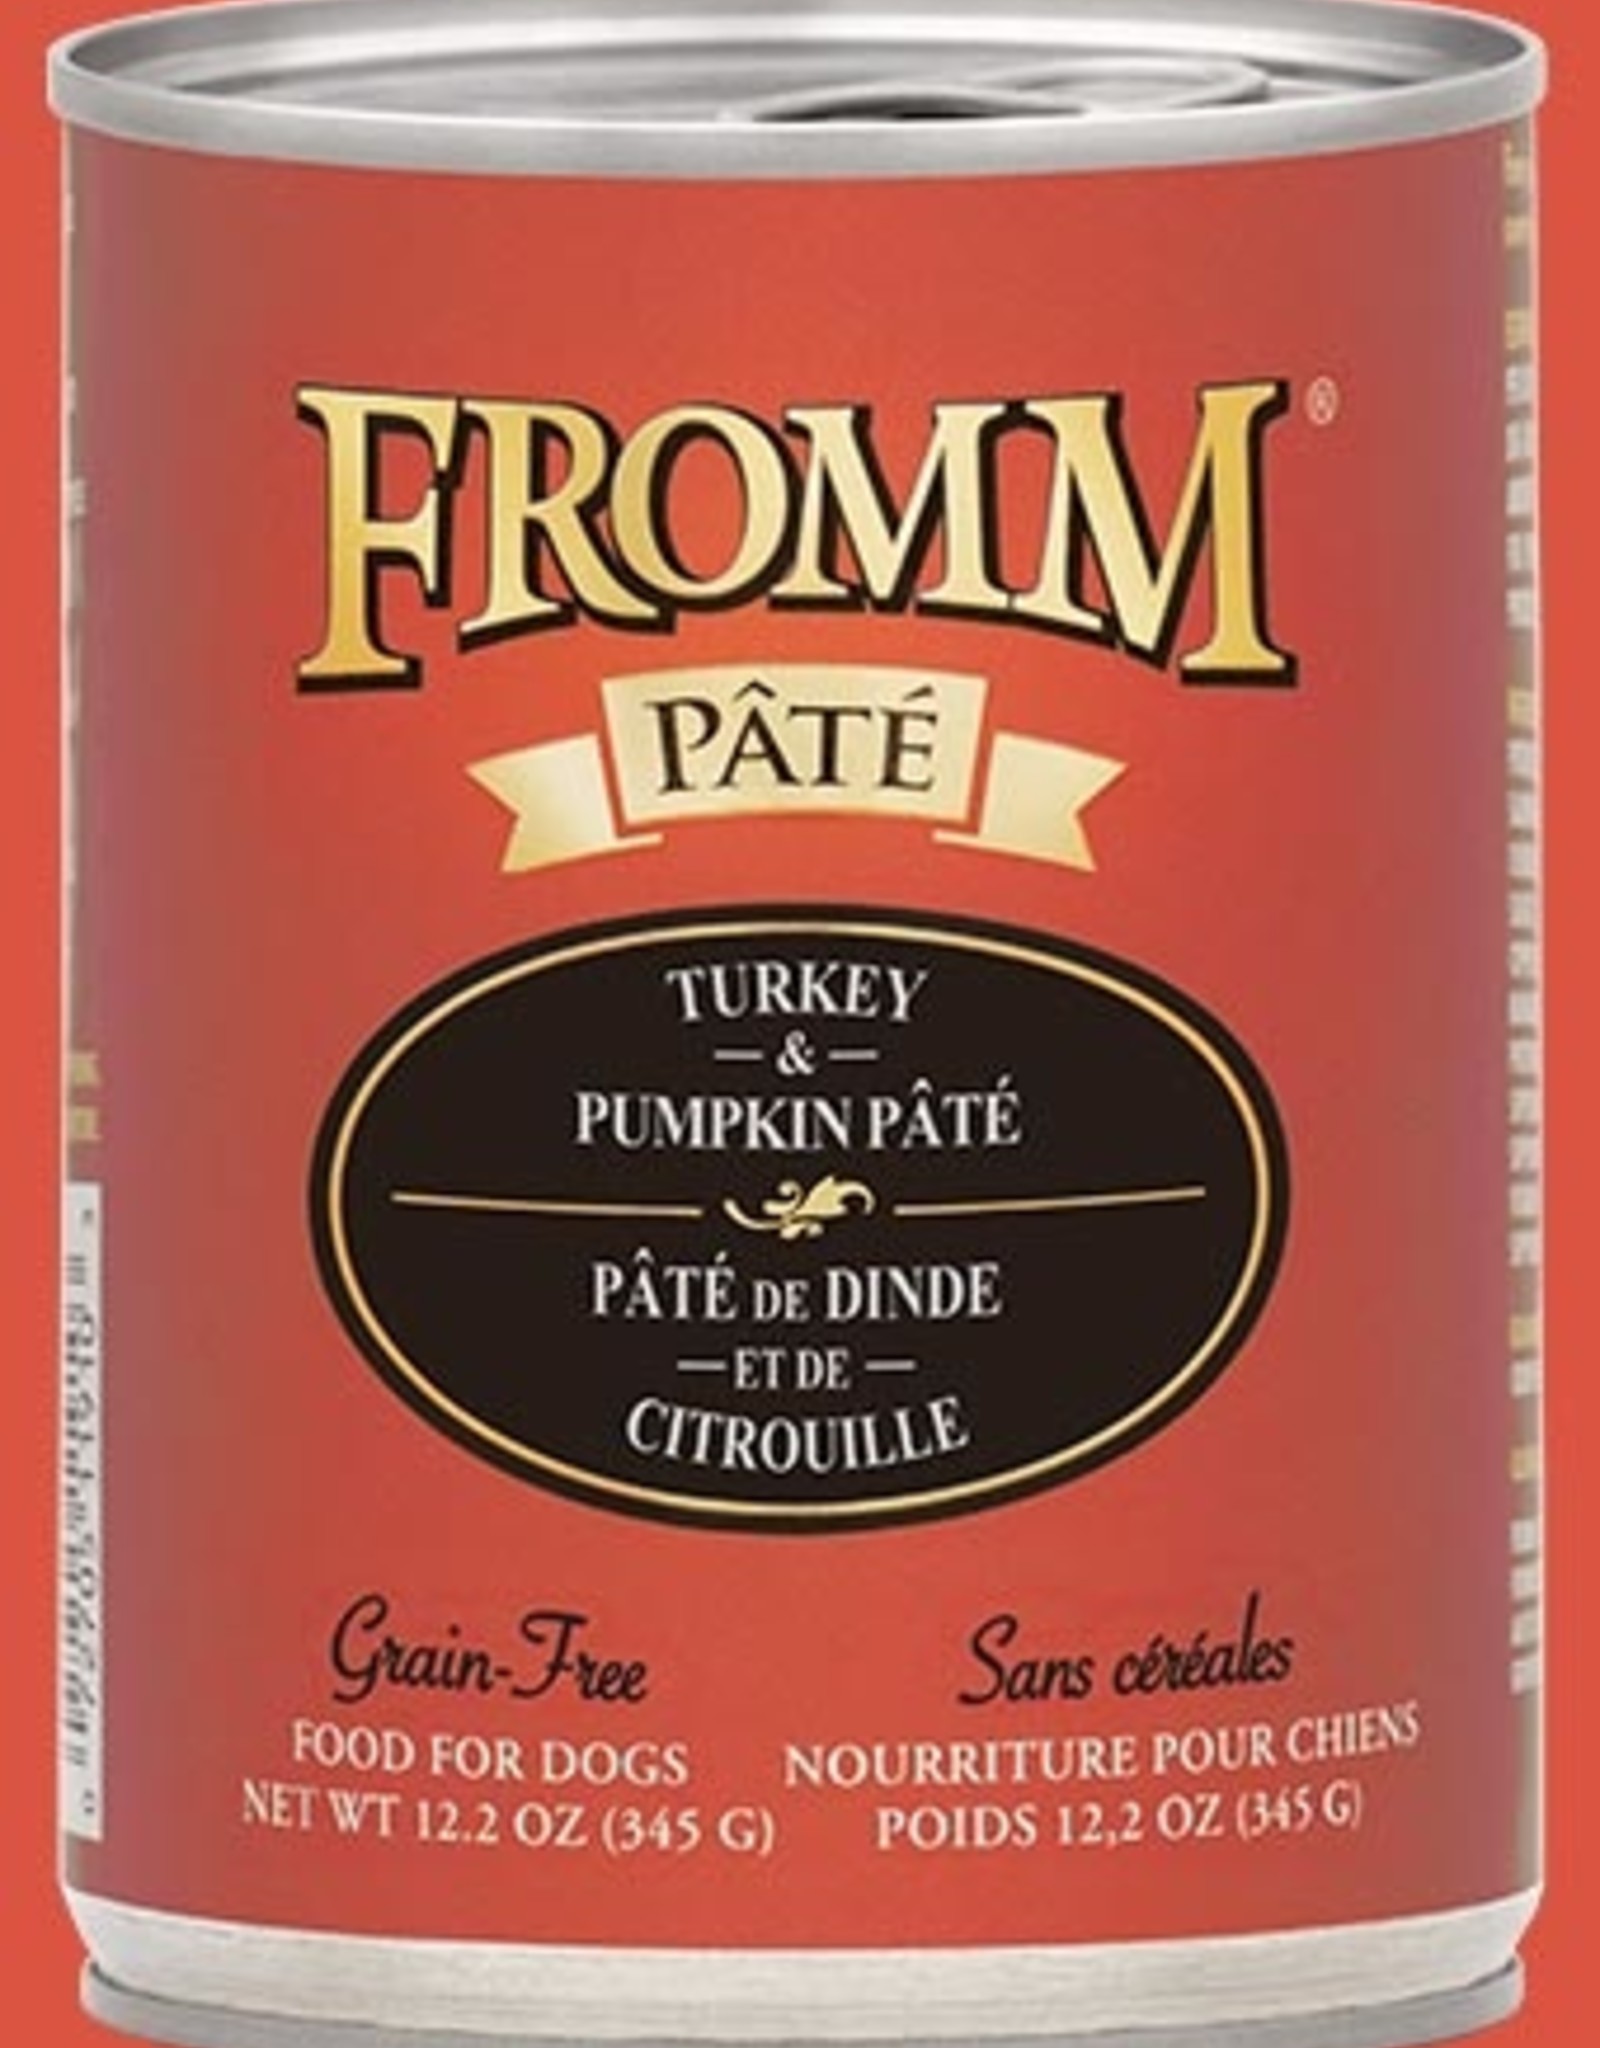 FROMM FAMILY FOODS LLC FROMM DOG PATE TURKEY PUMPKIN CAN 12.2 OZ CASE OF 12